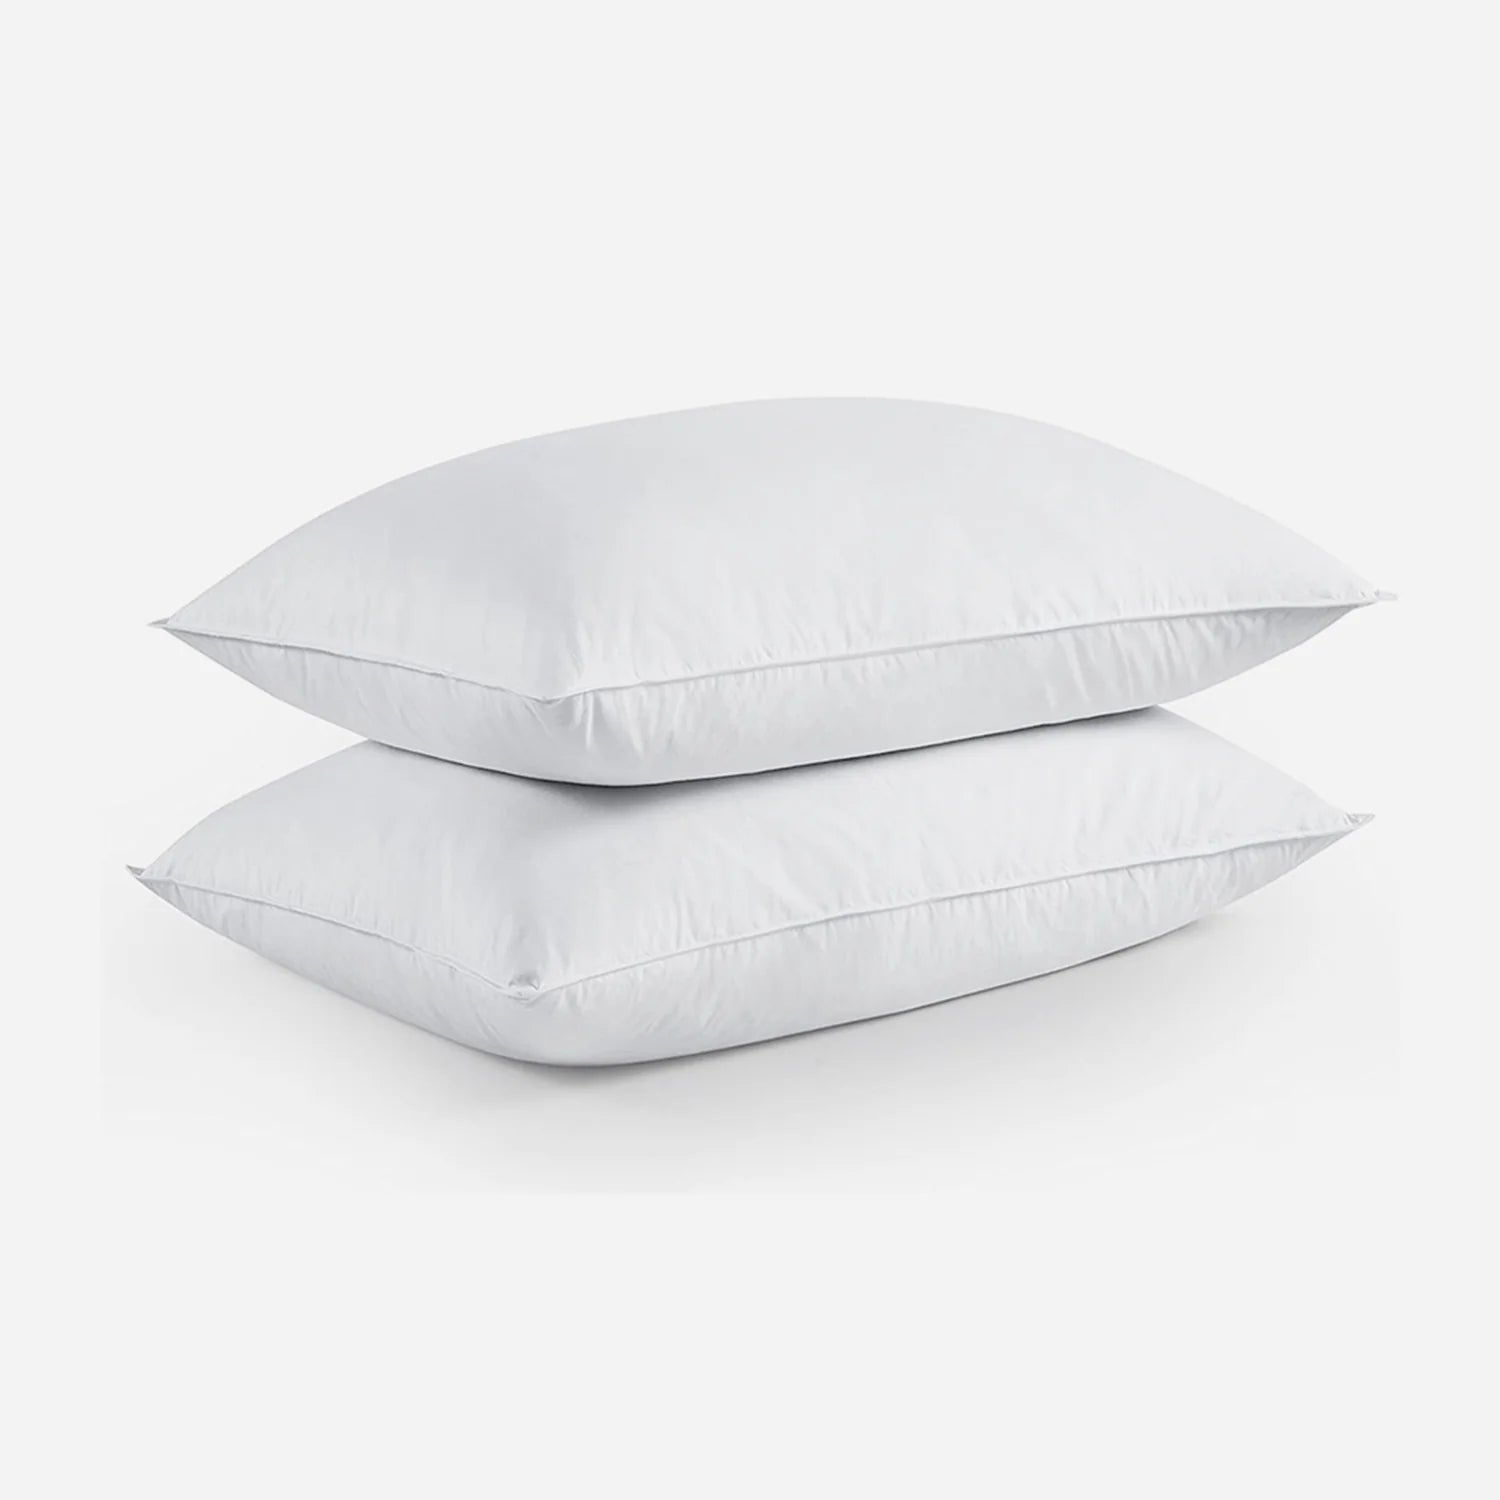 Soft Siesta Luxury Bed Pillows 20x28 - Pack of 2